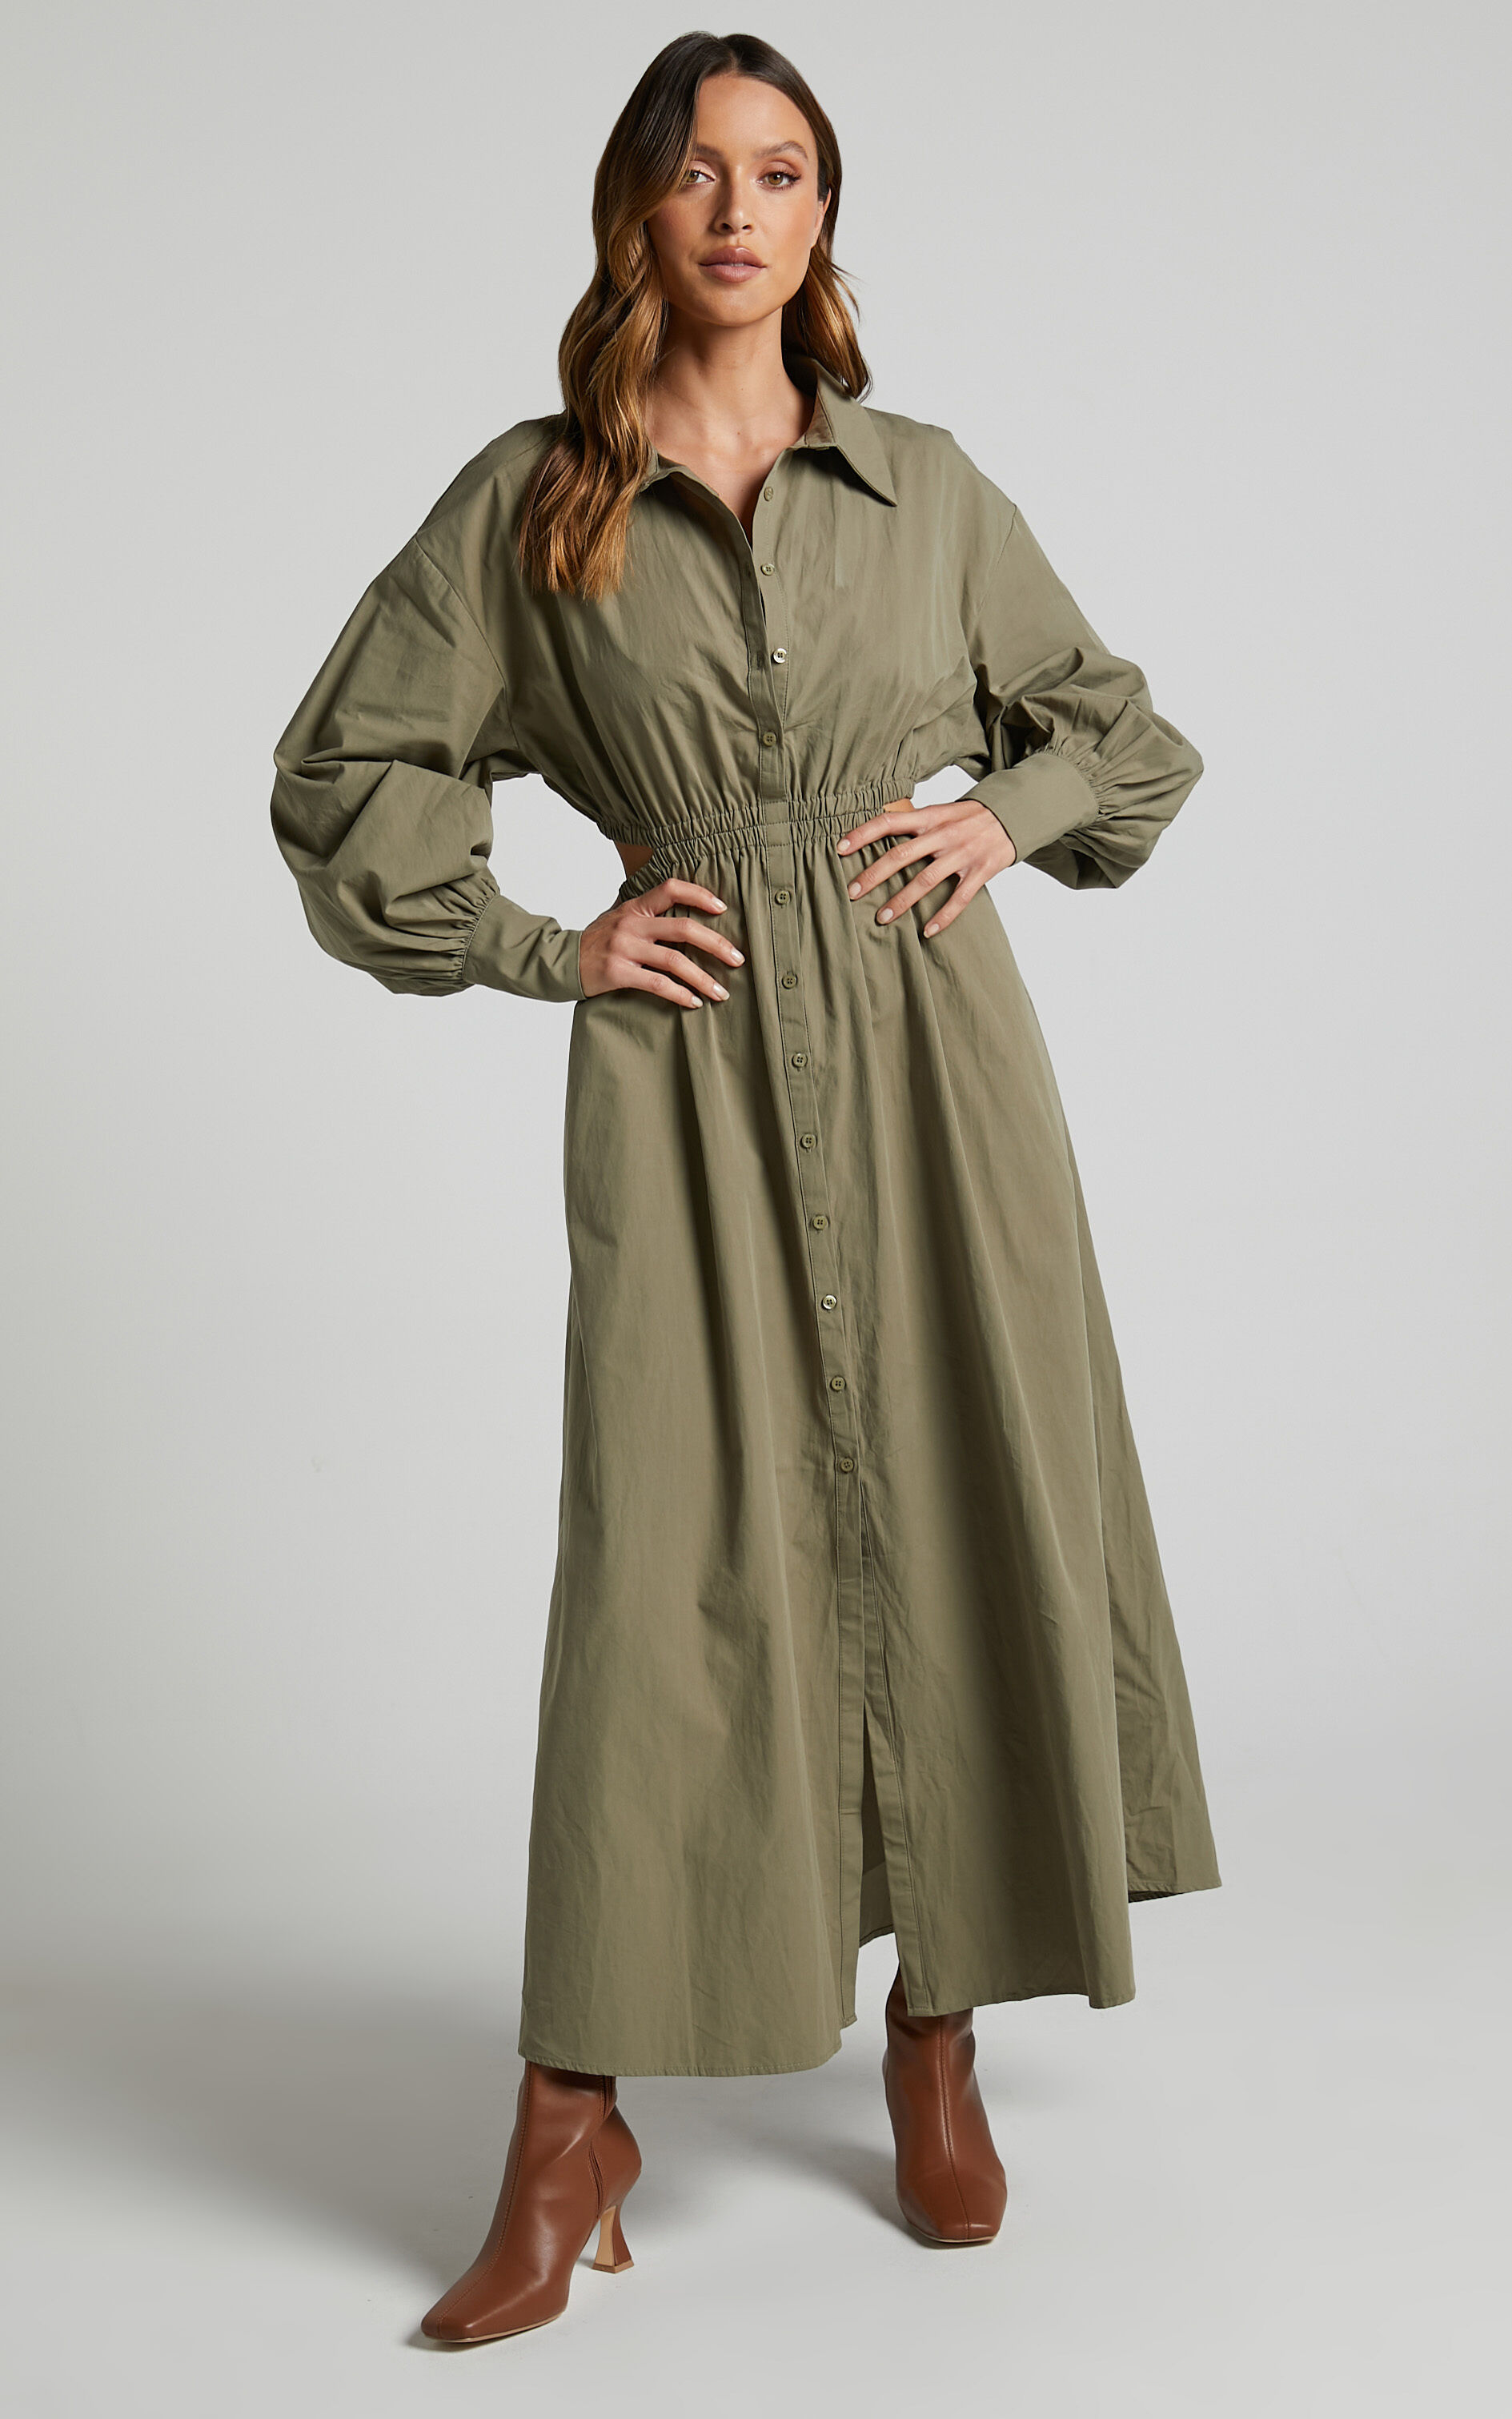 Merabelle Midi Dress - Side Cut Out Collared Long Sleeve Shirt Dress in Olive - 04, GRN1, super-hi-res image number null